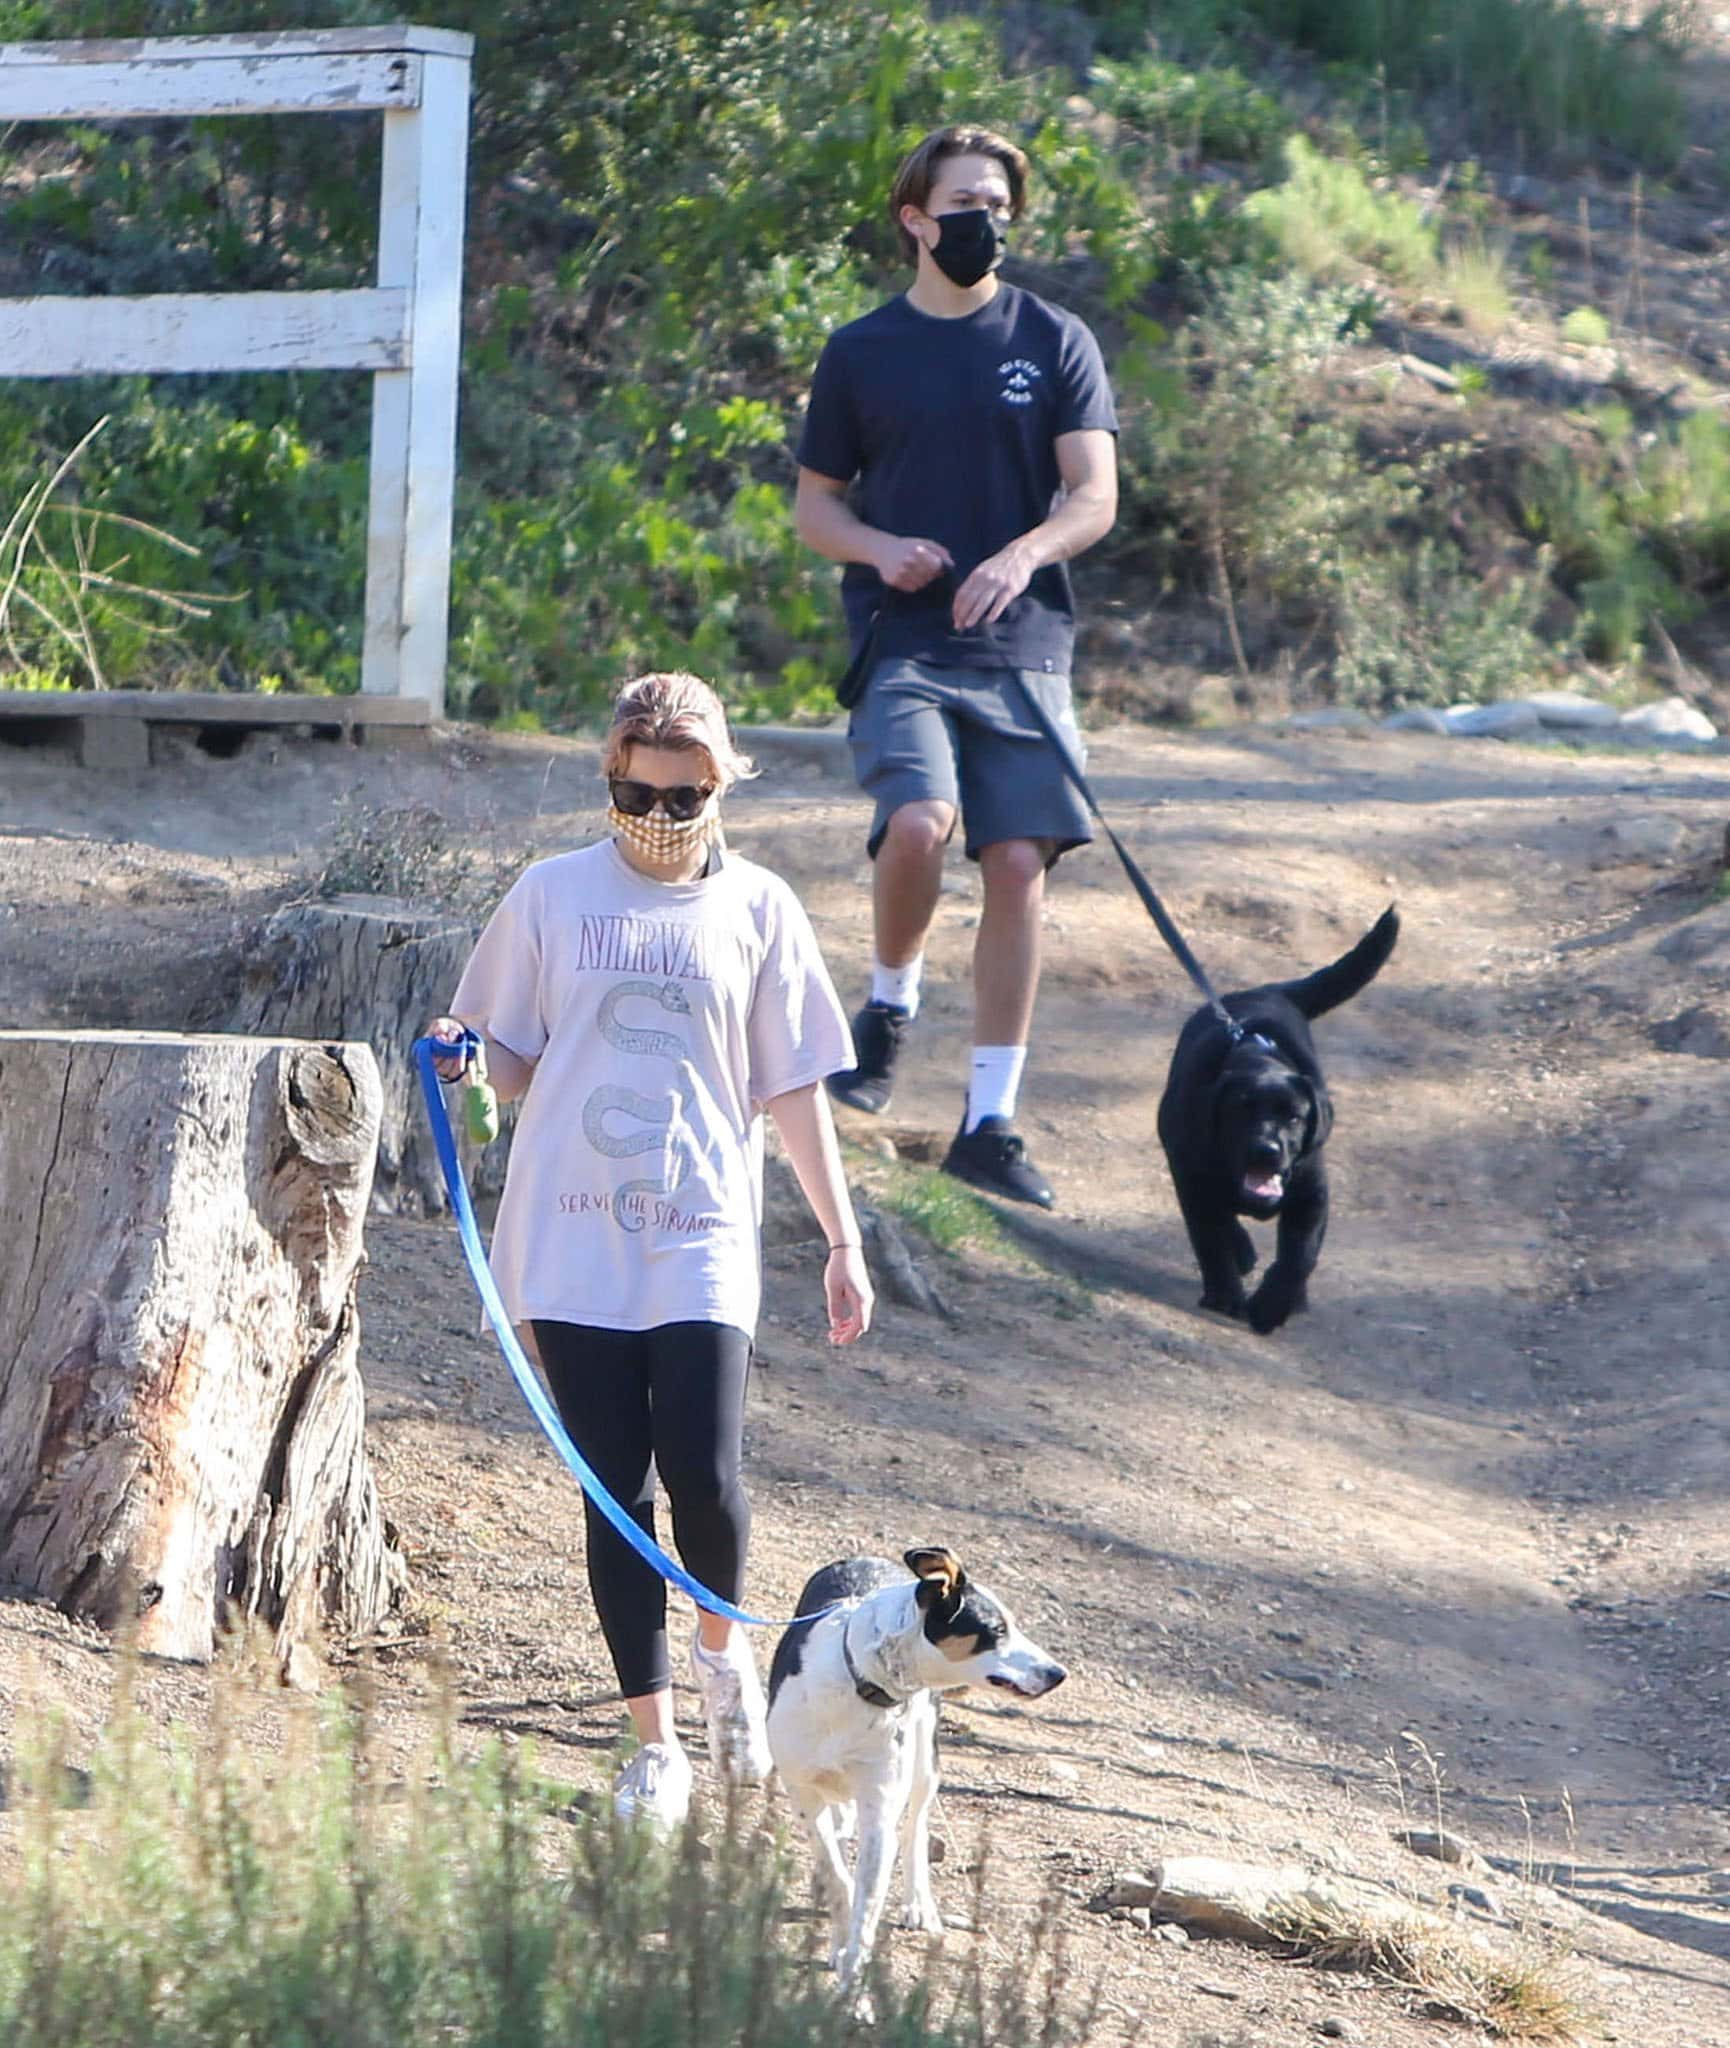 Deacon, 17, goes hiking in gray shorts and a black tee, while Ava, 21, wears an oversized Nirvana tee with cropped leggings